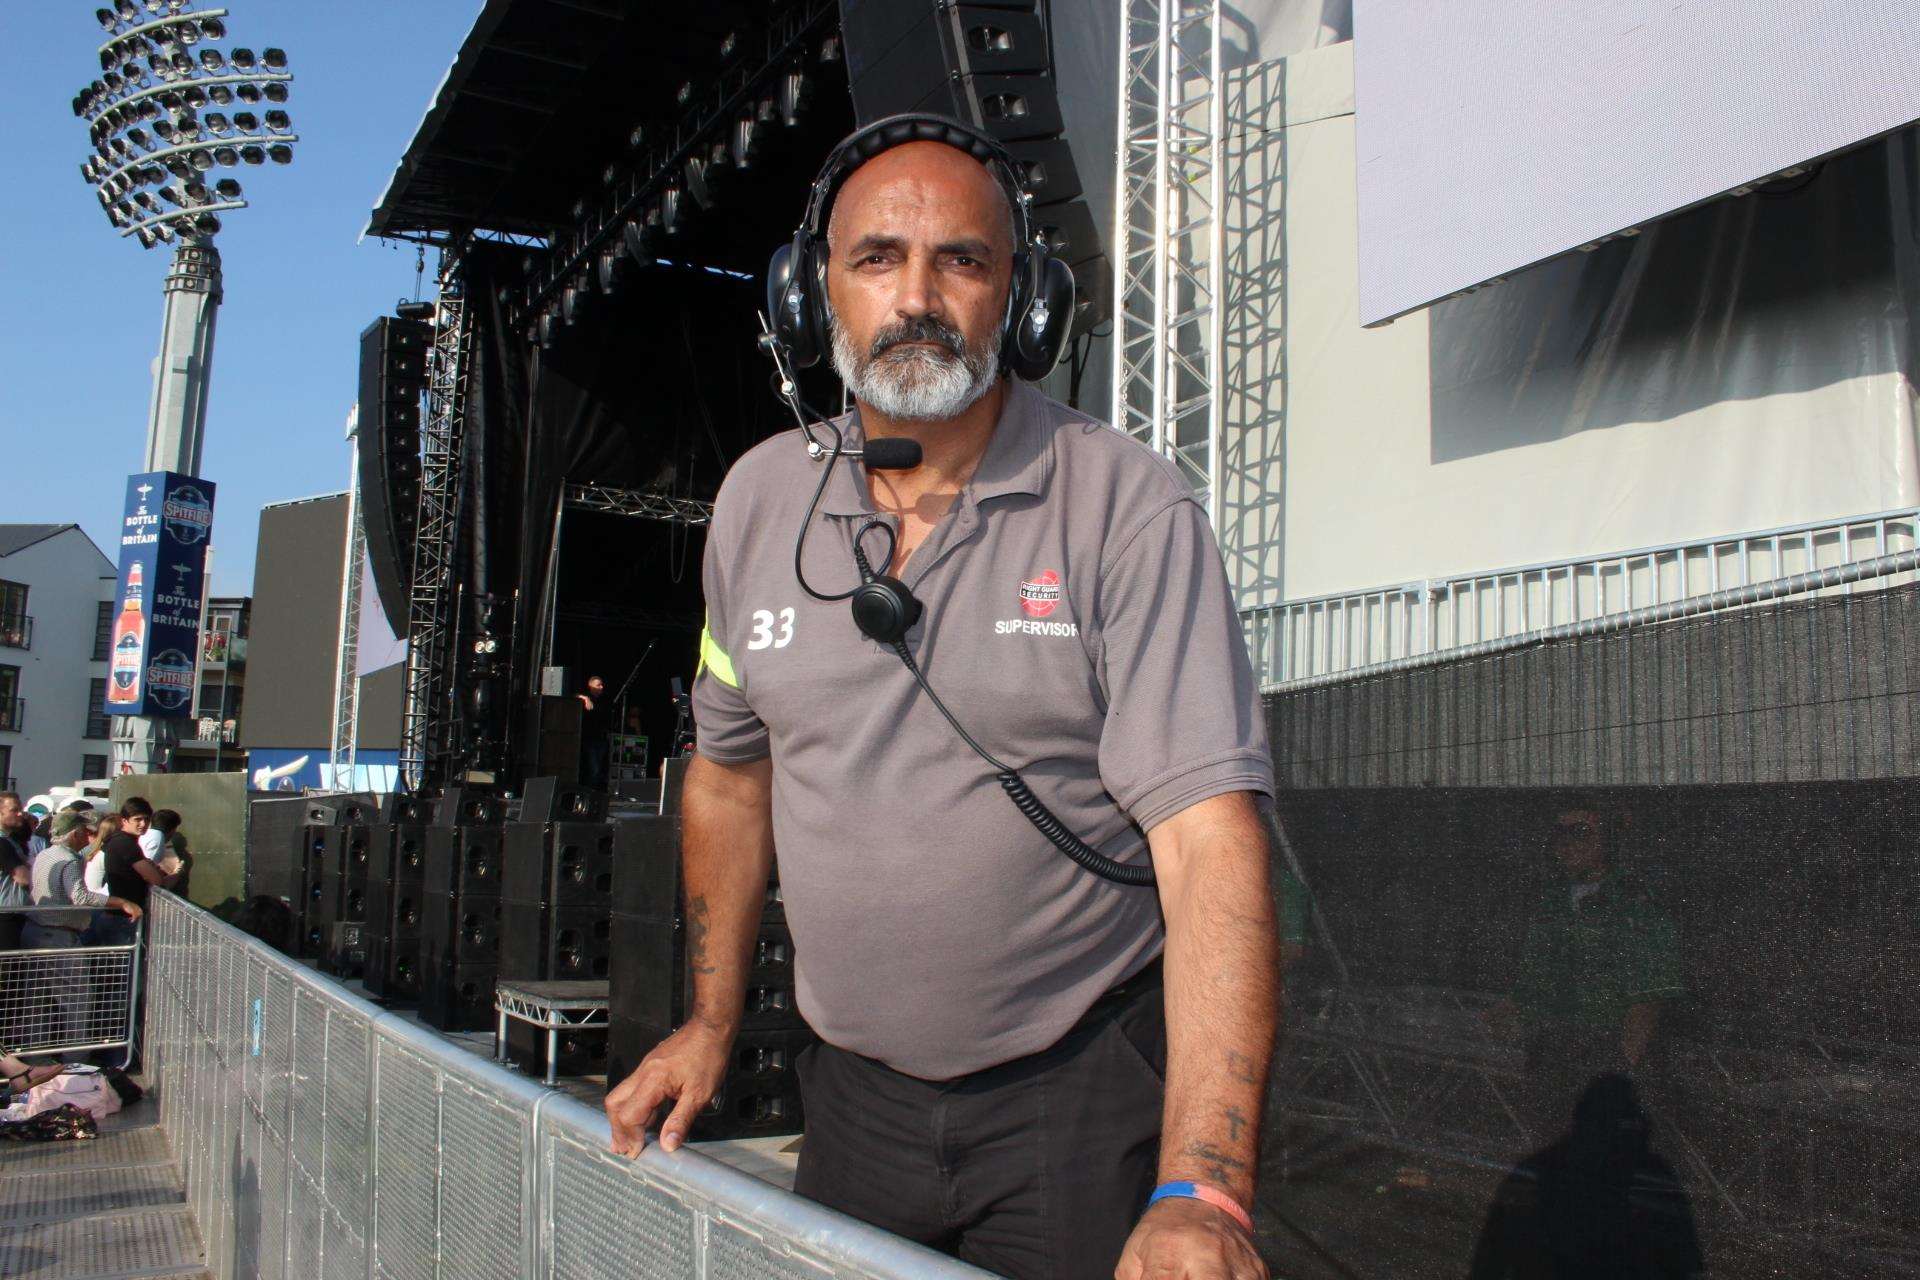 'Pit supervisor' Matt Ullah from Right Guard Security at Kent Cricket's Spitfire Ground, Canterbury, on Wednesday. Picture: John Nurden (2441305)